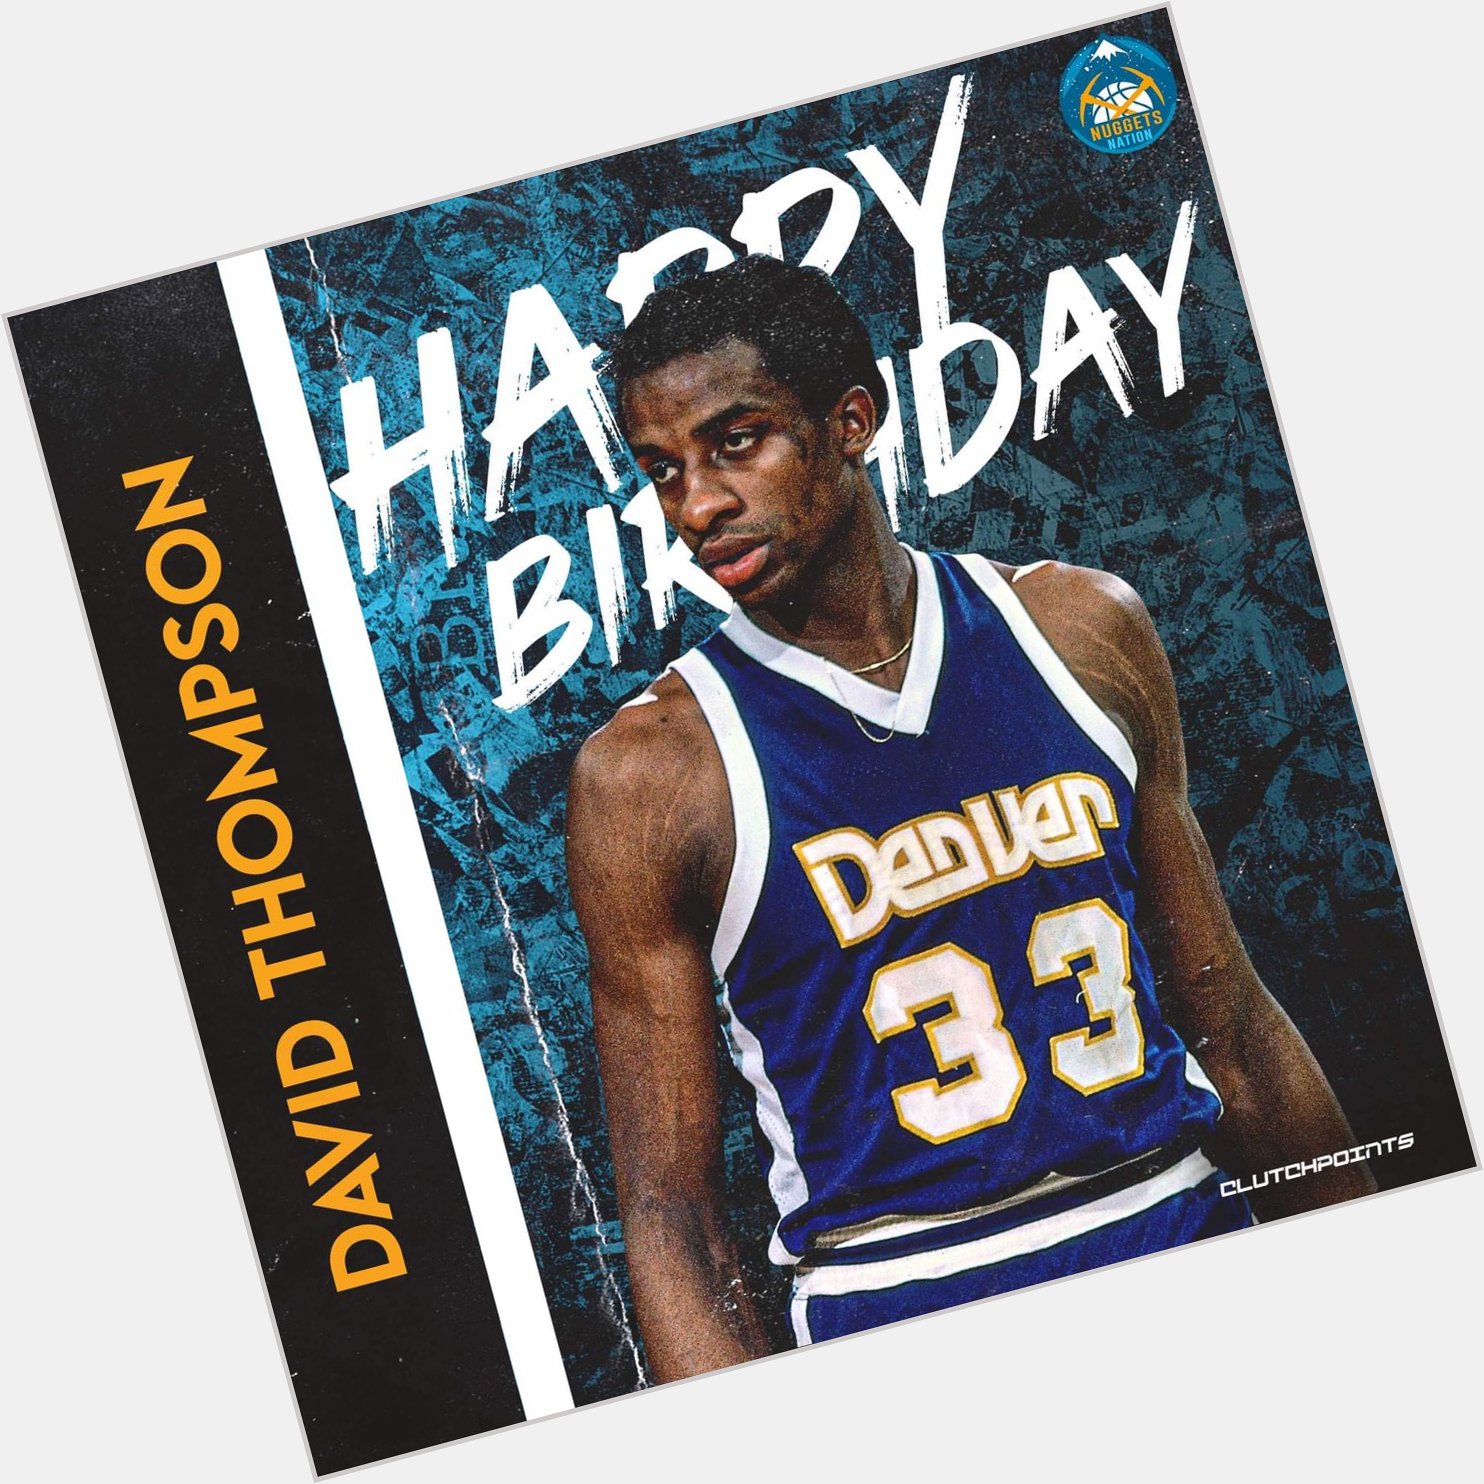 Join Nuggets Nation in greeting 1976 ROY, 5x All-star and Hall of Famer, David Thompson, a happy 67th birthday!  